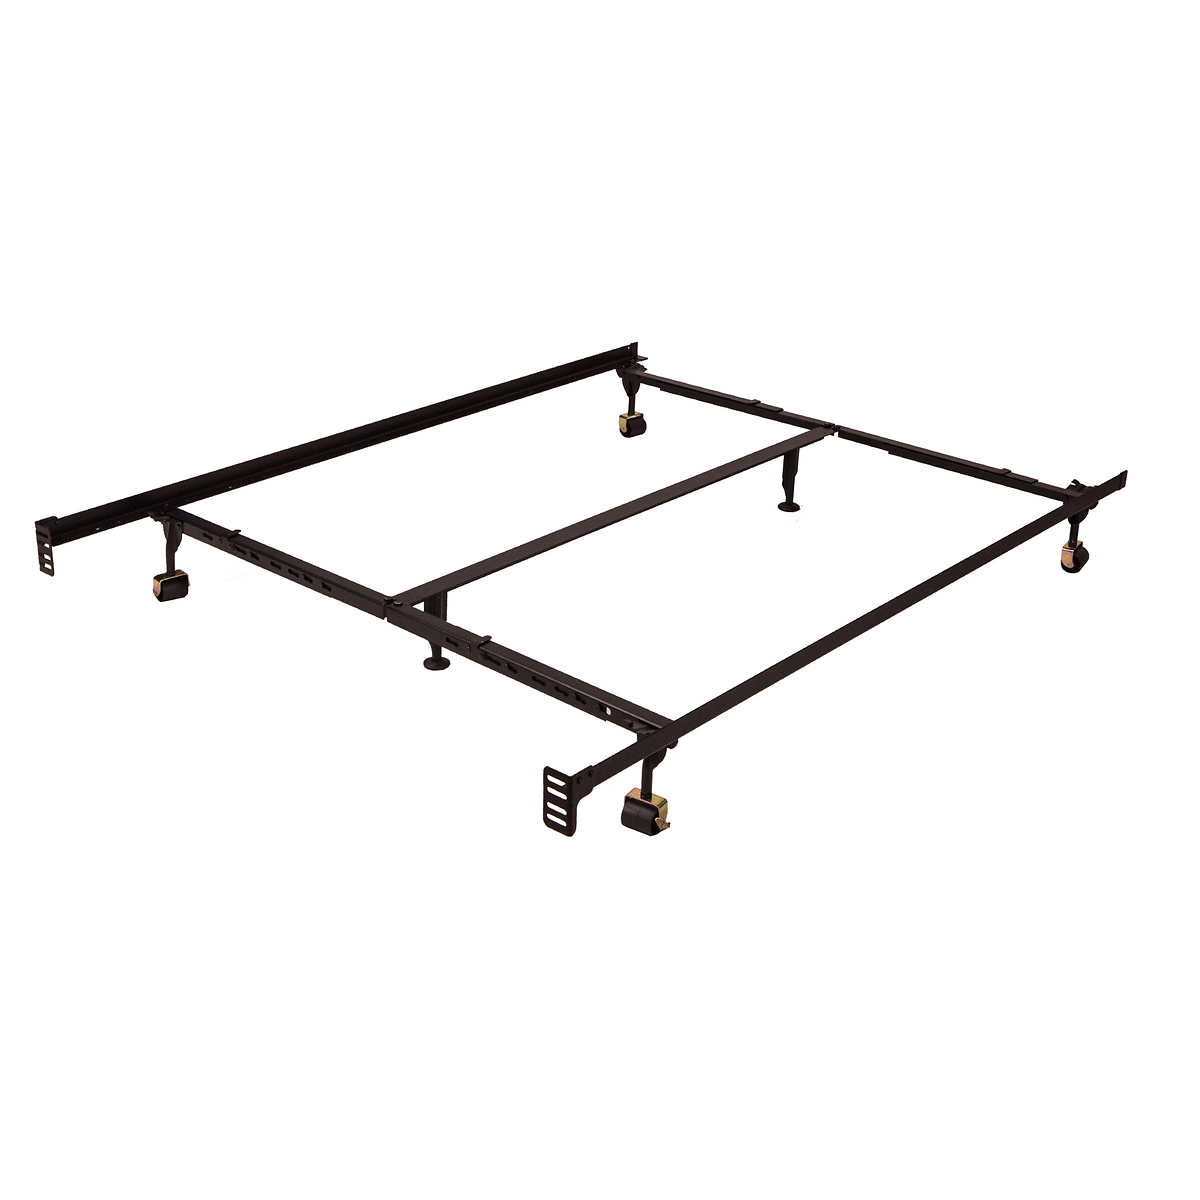 Premium Universal Lev R Lock Bed Frame, Bed Frame Wheel Replacement